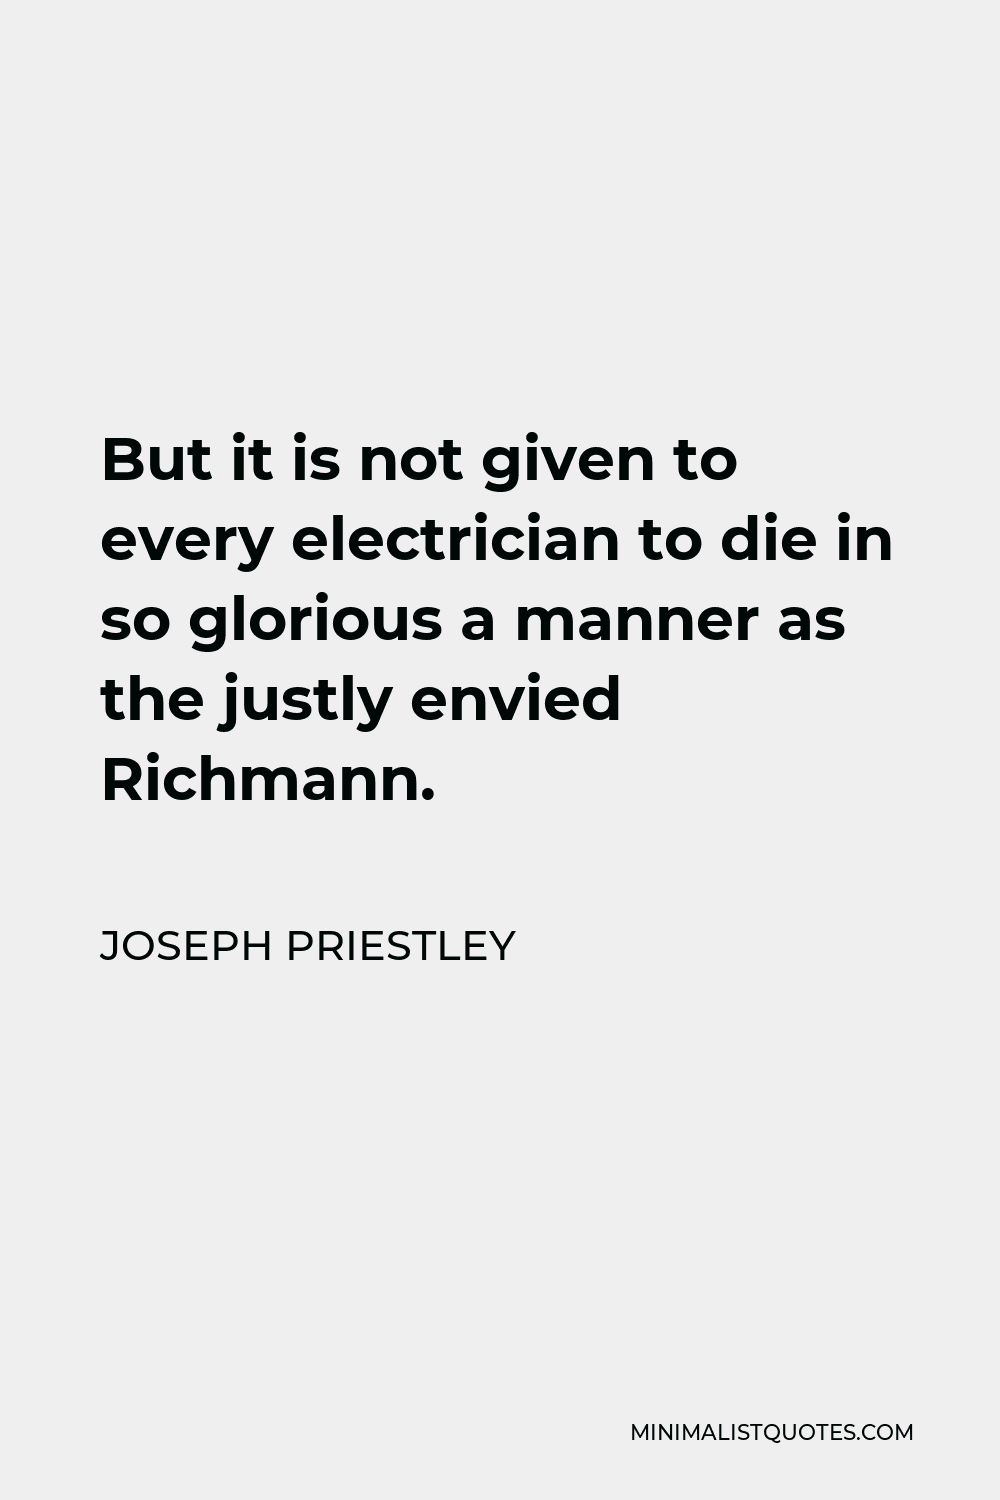 Joseph Priestley Quote - But it is not given to every electrician to die in so glorious a manner as the justly envied Richmann.